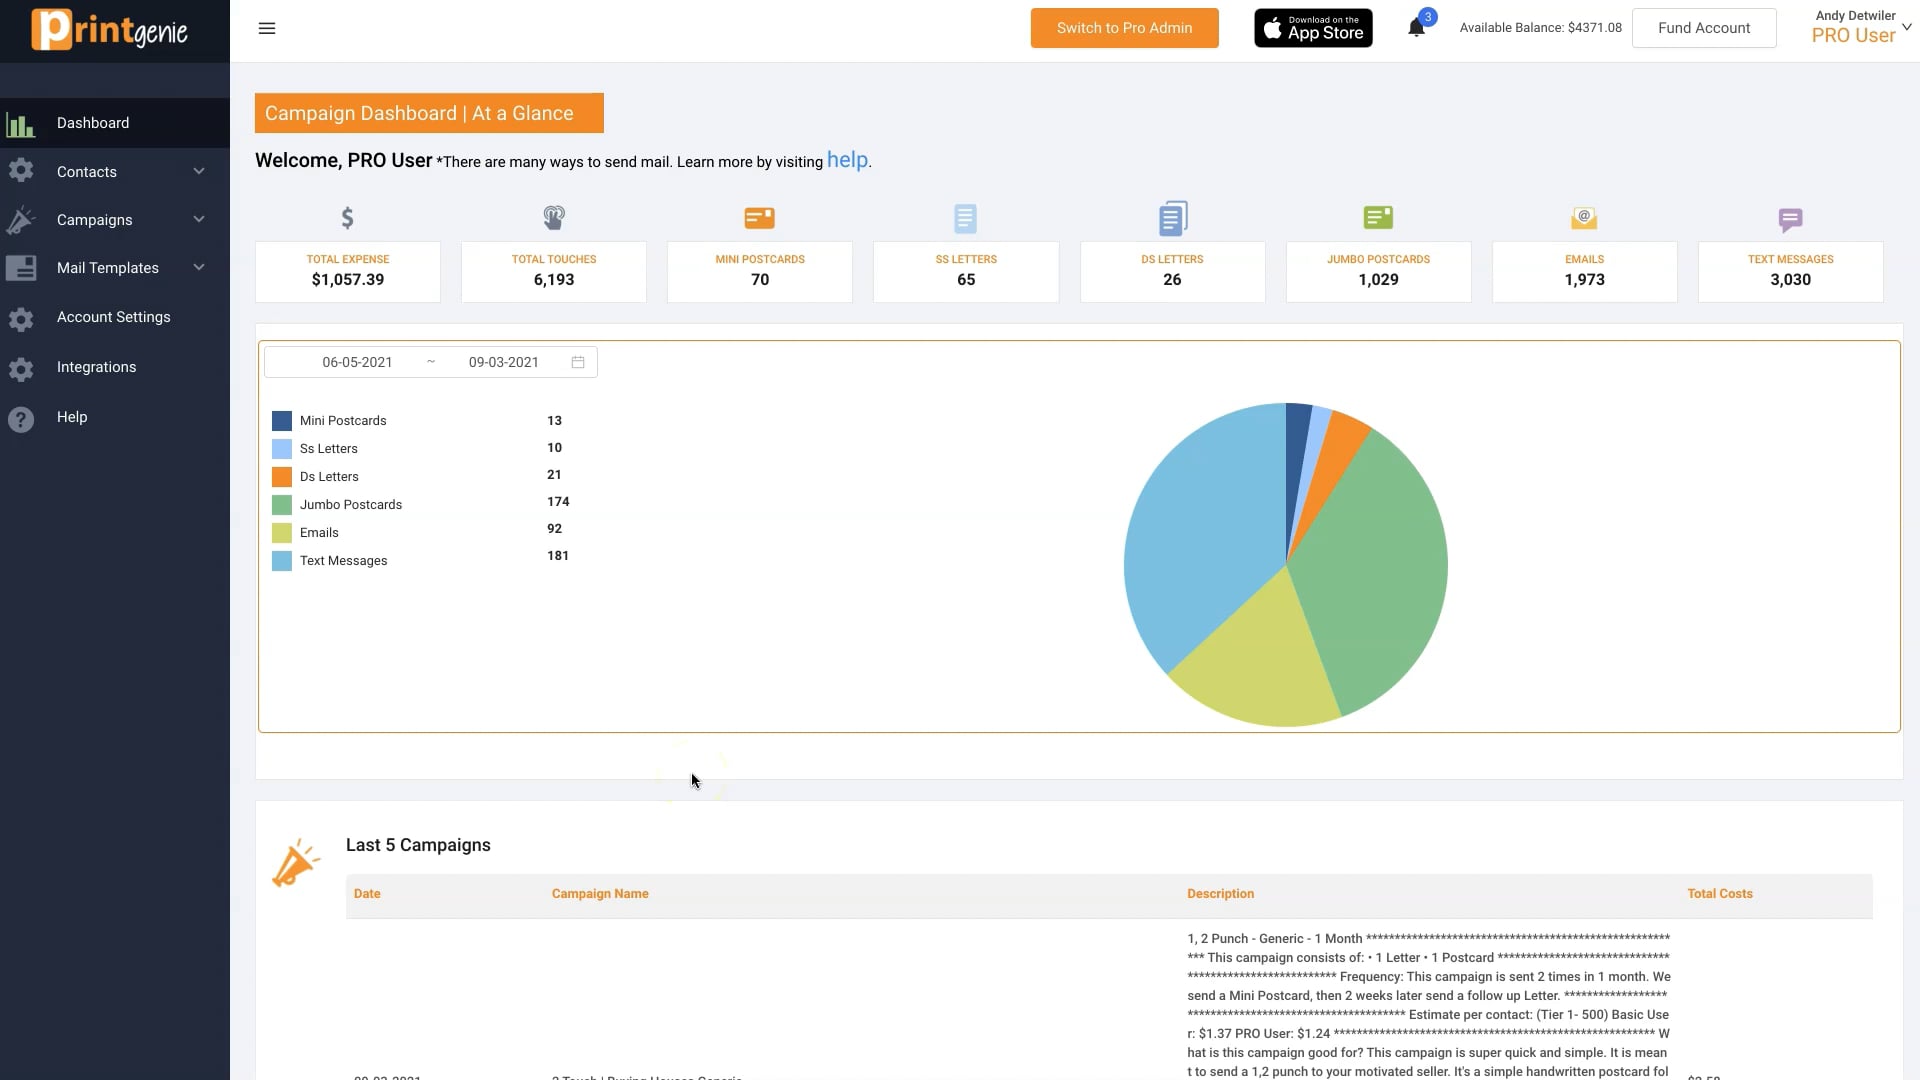 User Dashboard Overview